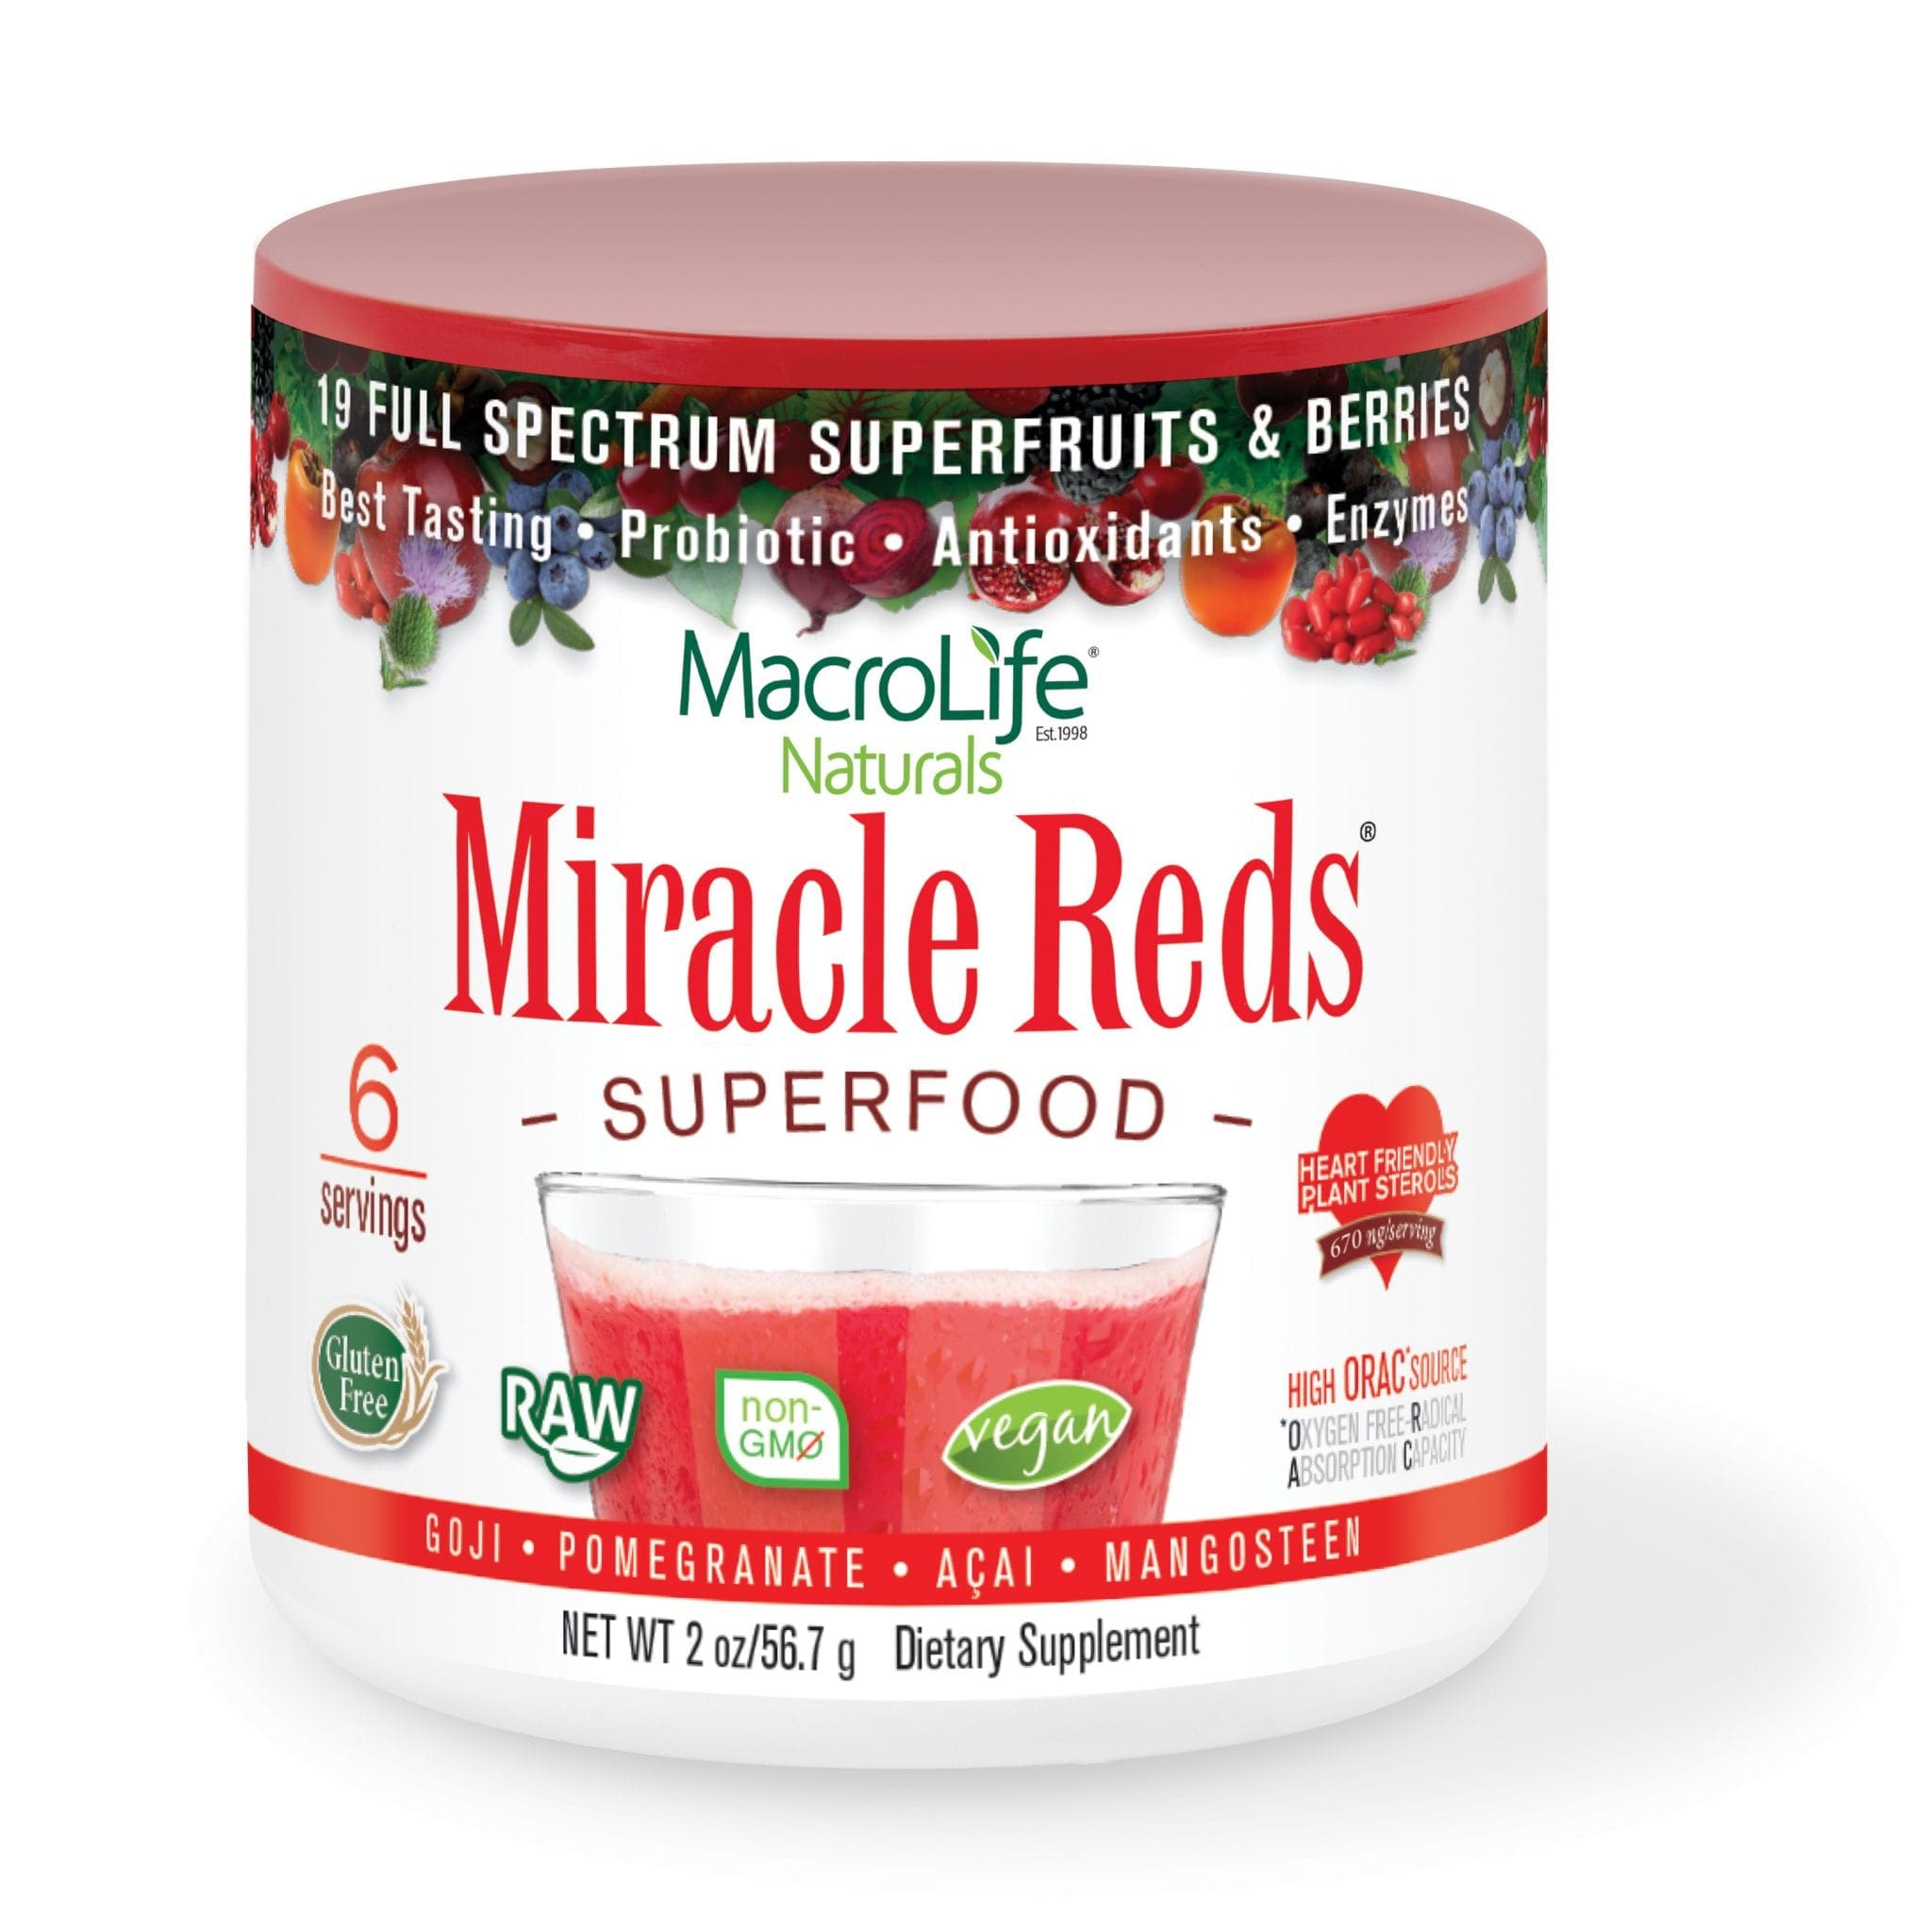 MacroLife Naturals Miracle Reds Drink Powder 30 oz for sale online 